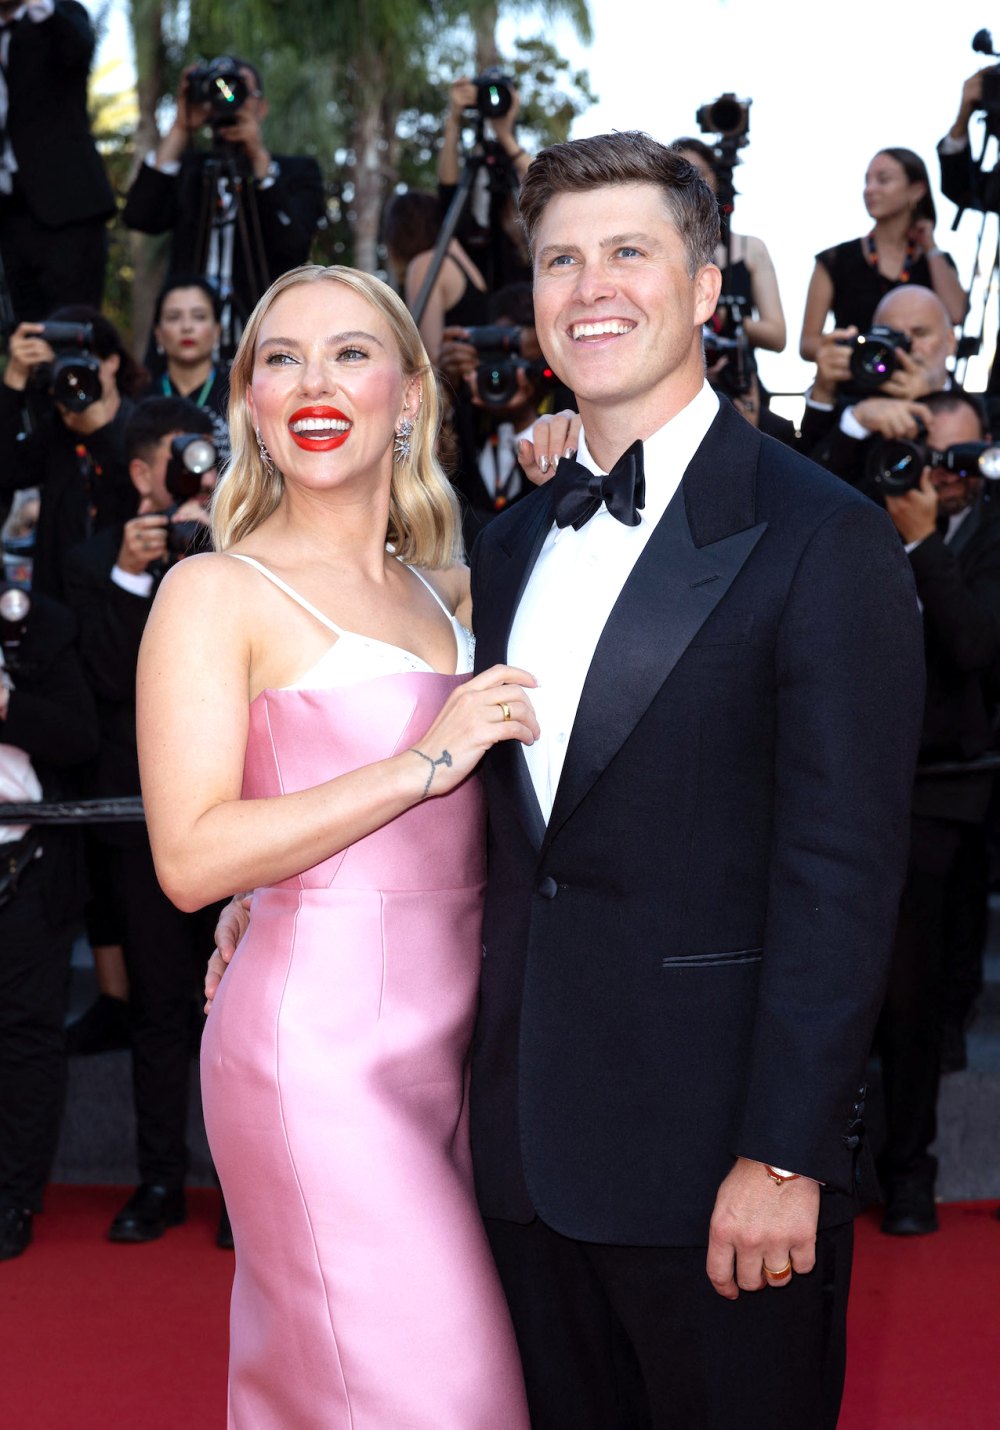 Scarlett Johansson Shares Secret to Her Marriage With Colin Jost